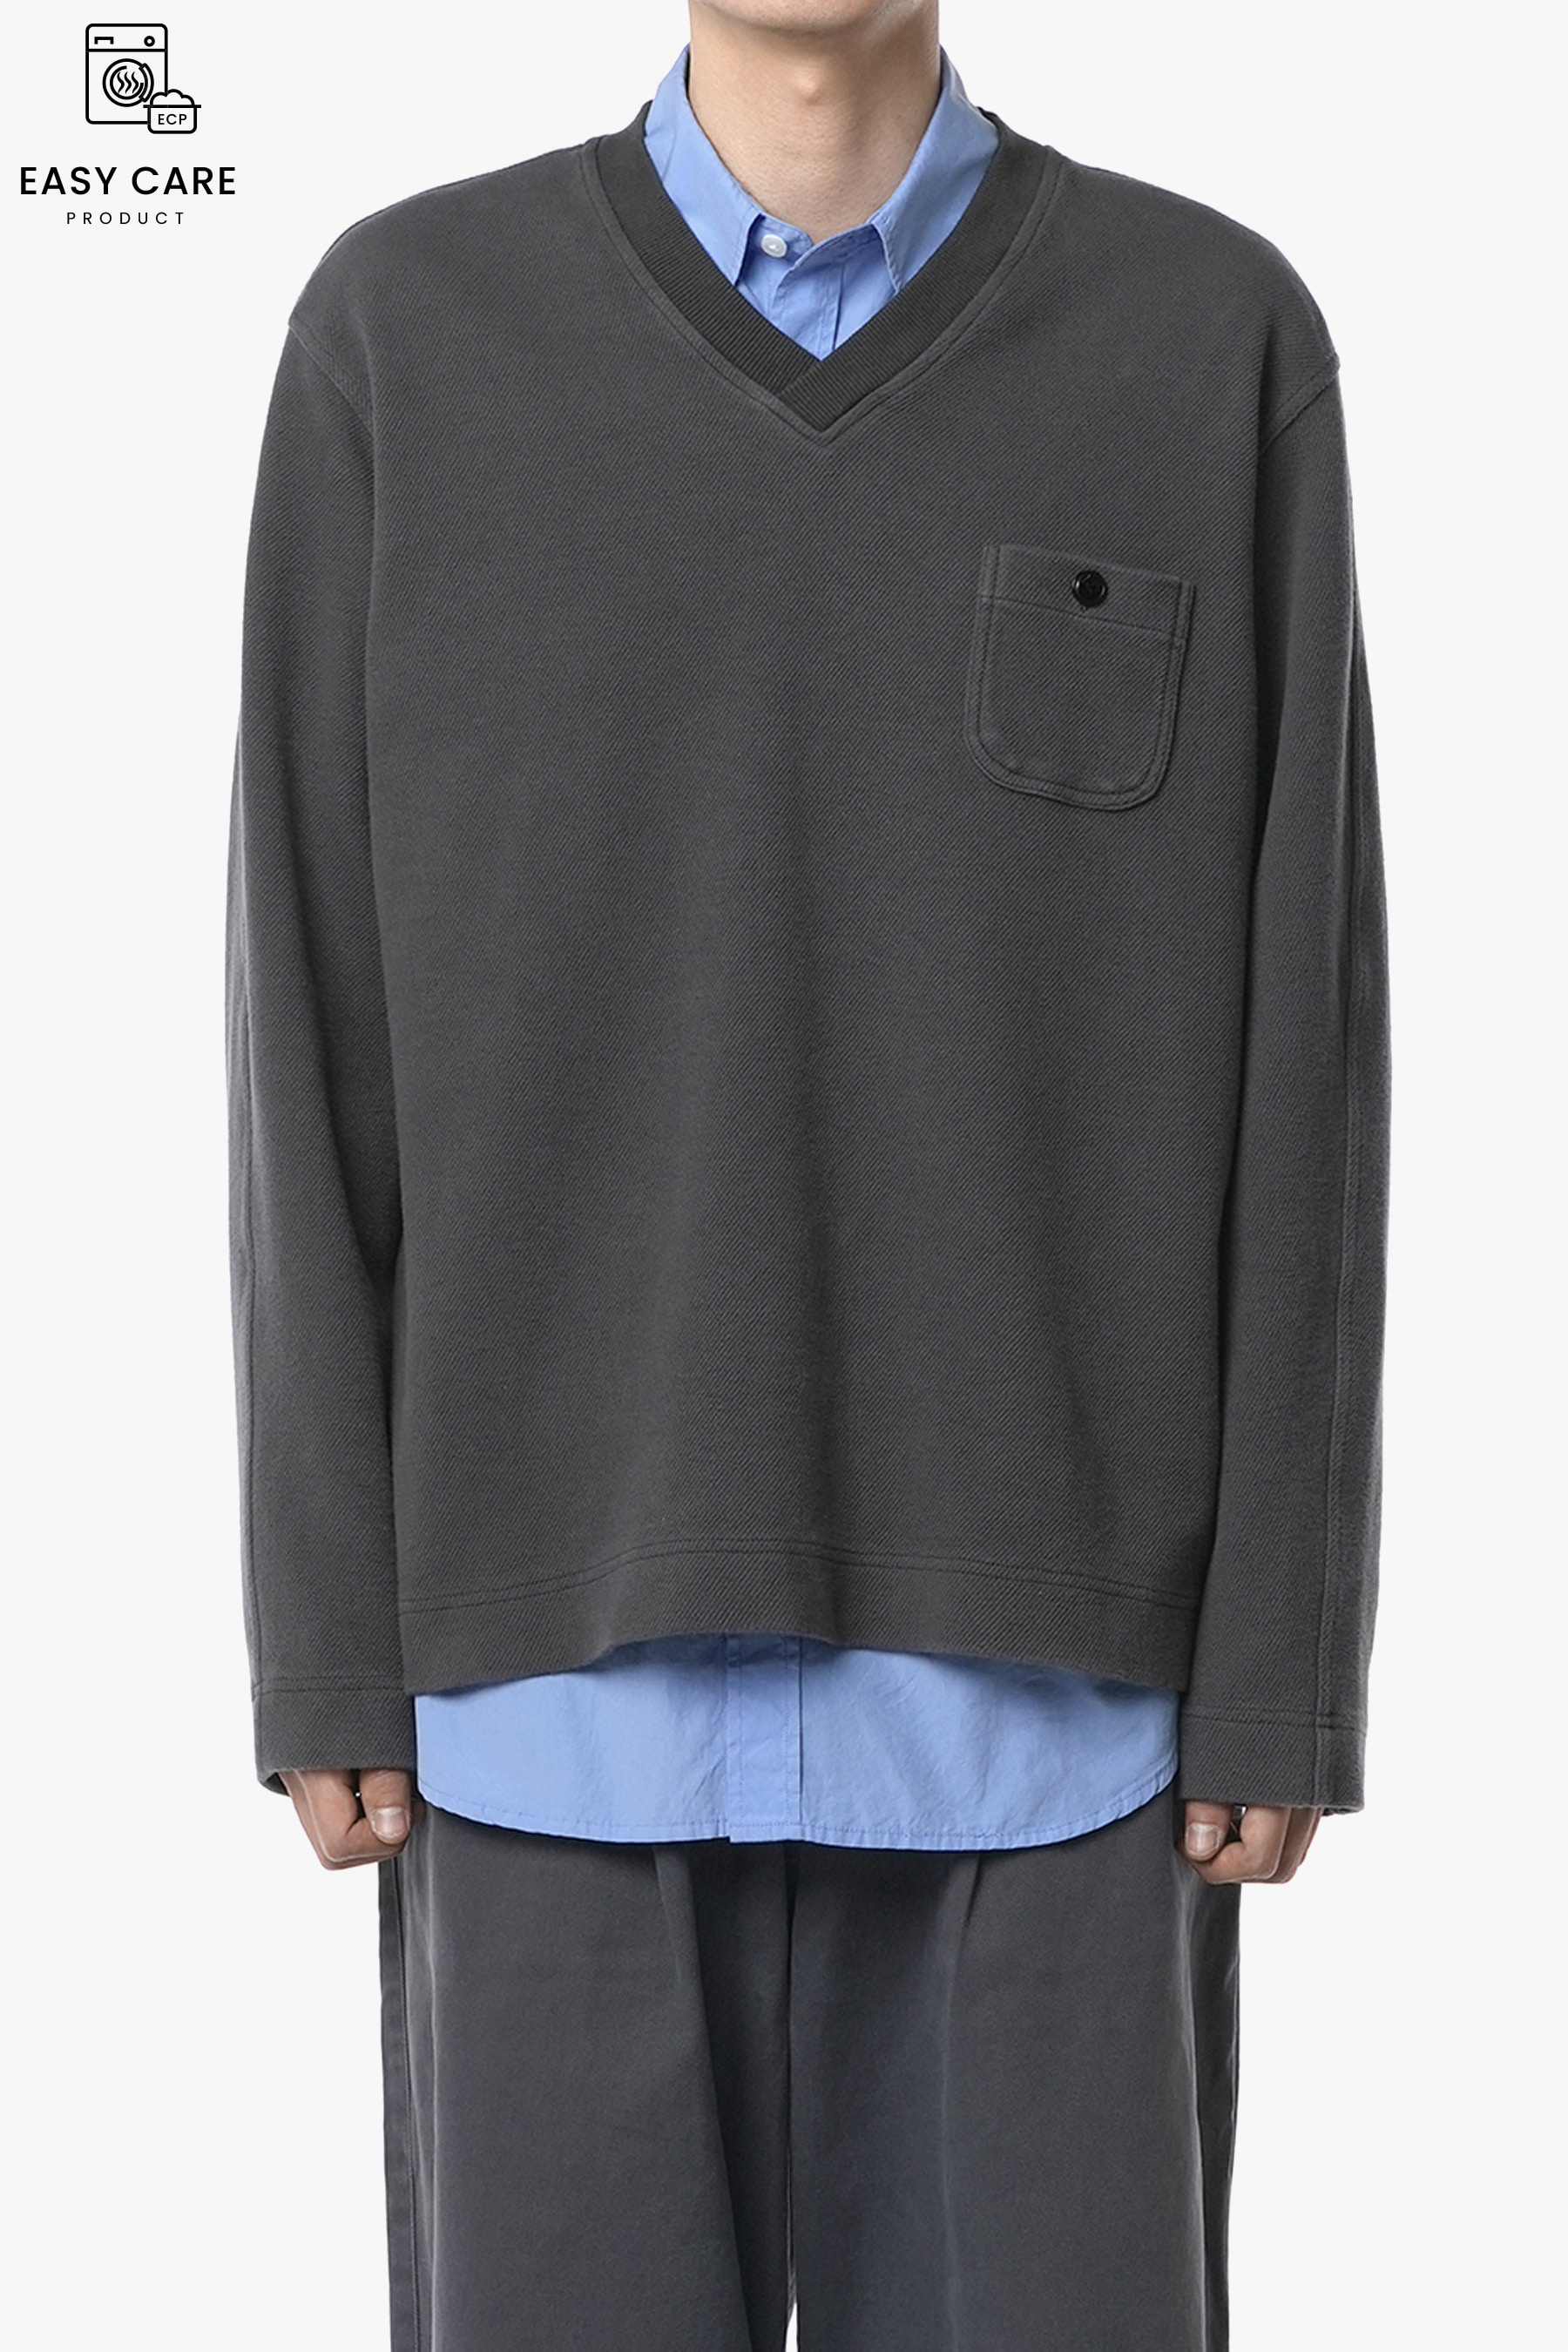 DARK GREY WASHED FRENCH TERRY COTTON DRILL V-NECK SWEAT (ECP GARMENT PROCESS)